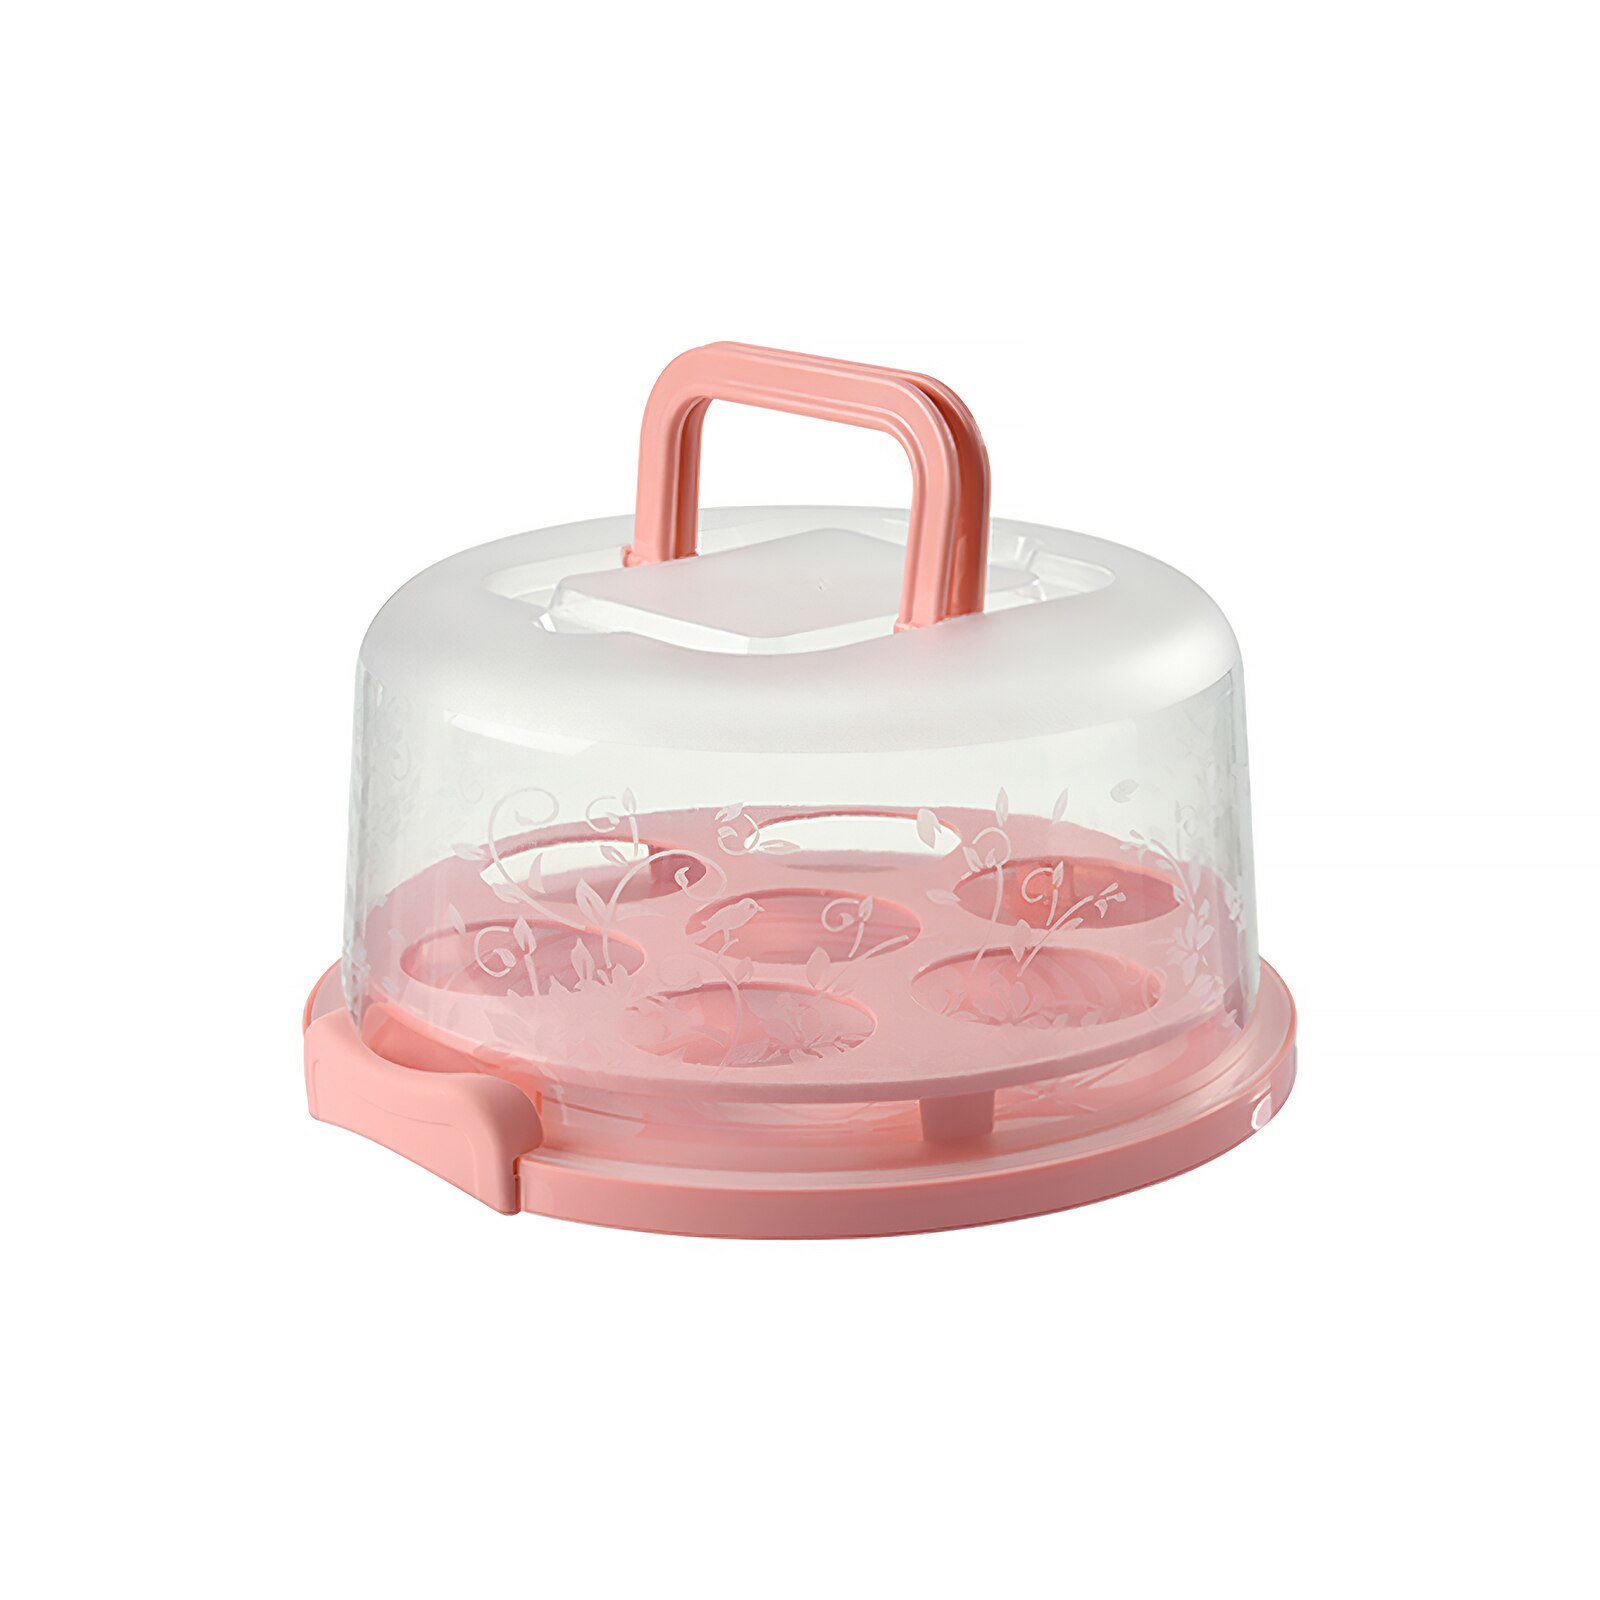 Draagbare Plastic Ronde Cake Container Dessert Container Doos Cake Carrier Server Opbergdoos Tray Kitchen Tools: Pink